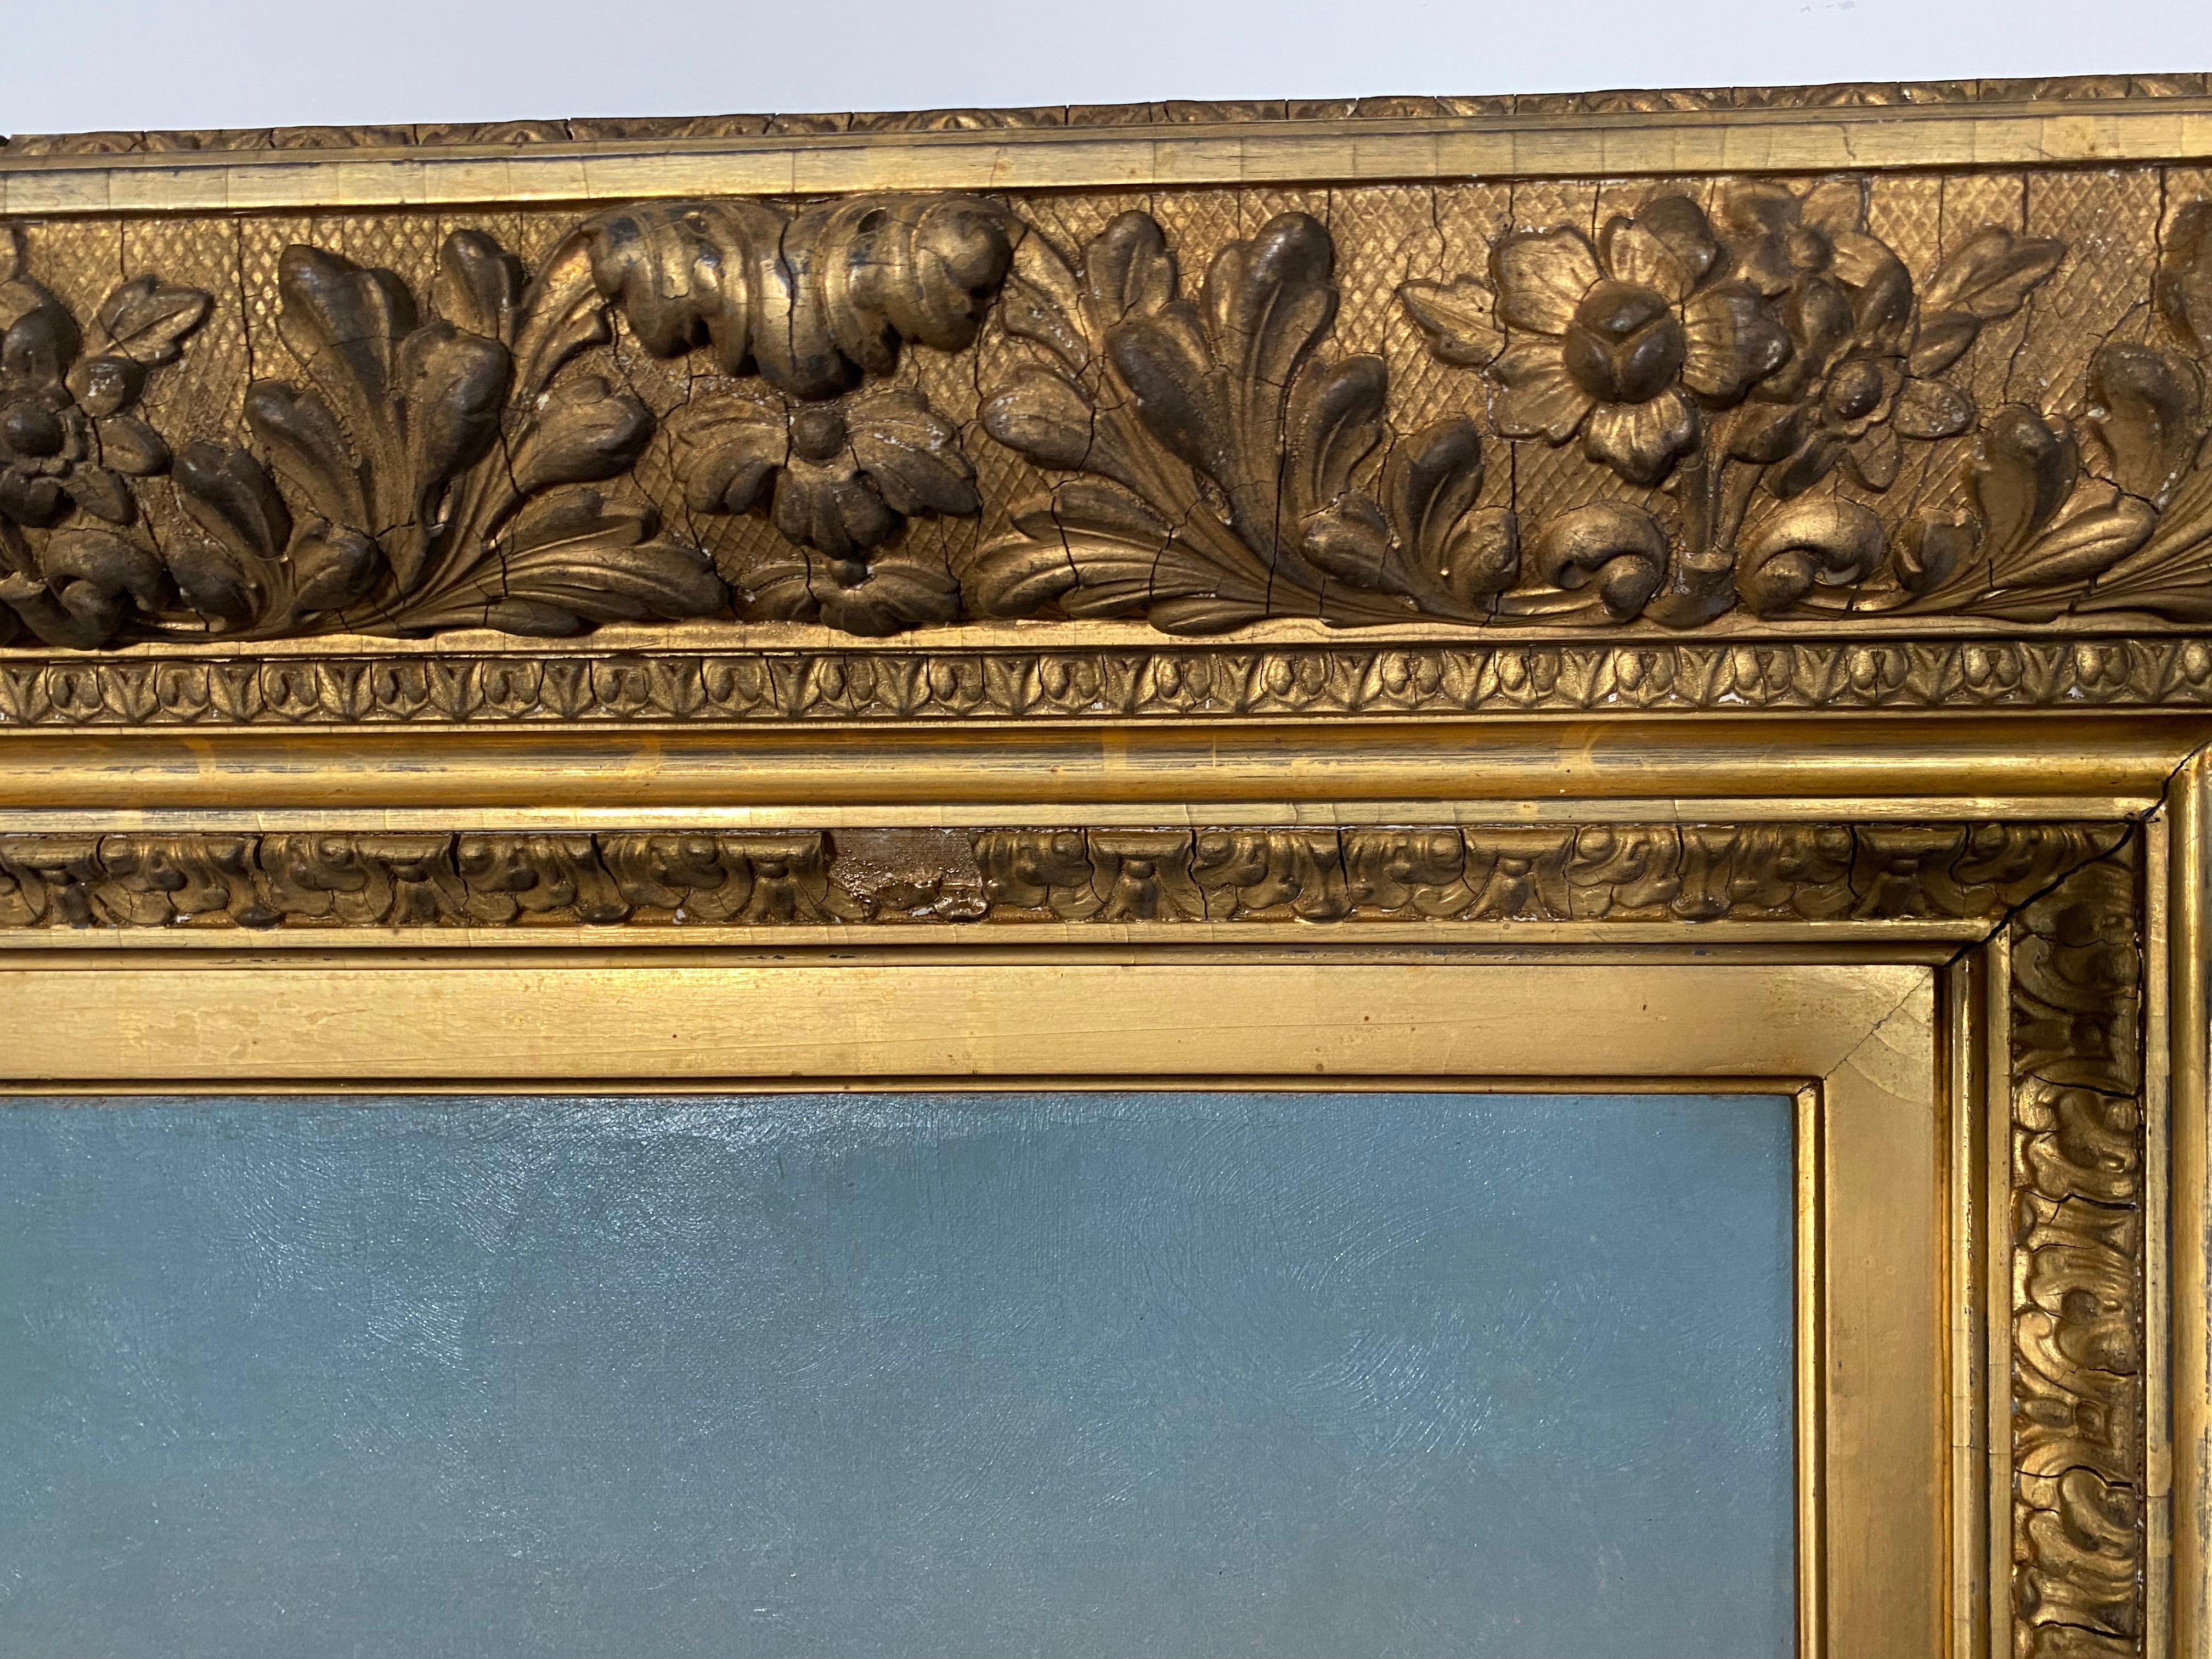 A classic and elegant Venetian view with a period Barbizon, gold leaf frame! Sheppard did a series of these and two other American painter is more noted for their Venetian views than this artist.  
Palazzo Dario is a classic composition from Warren